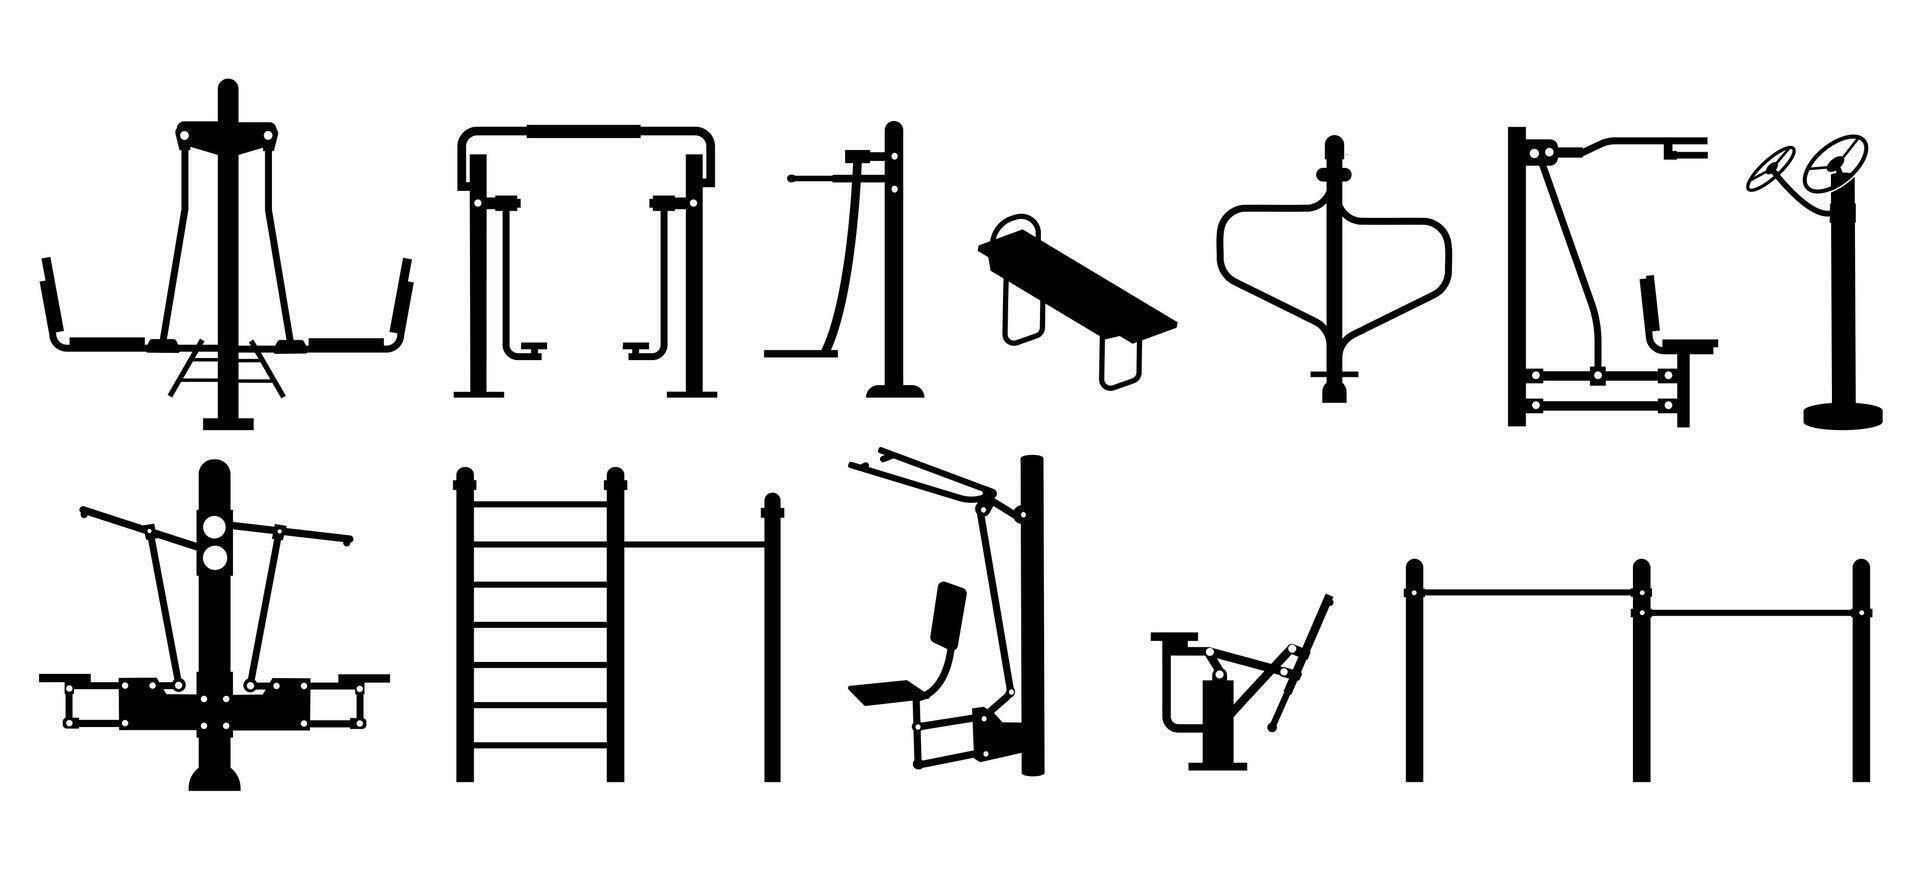 Outdoor workout equipment silhouette. Fitness gym equipment horizontal bar, outdoor fitness bar with machines and fitness equipment. Vector illustration